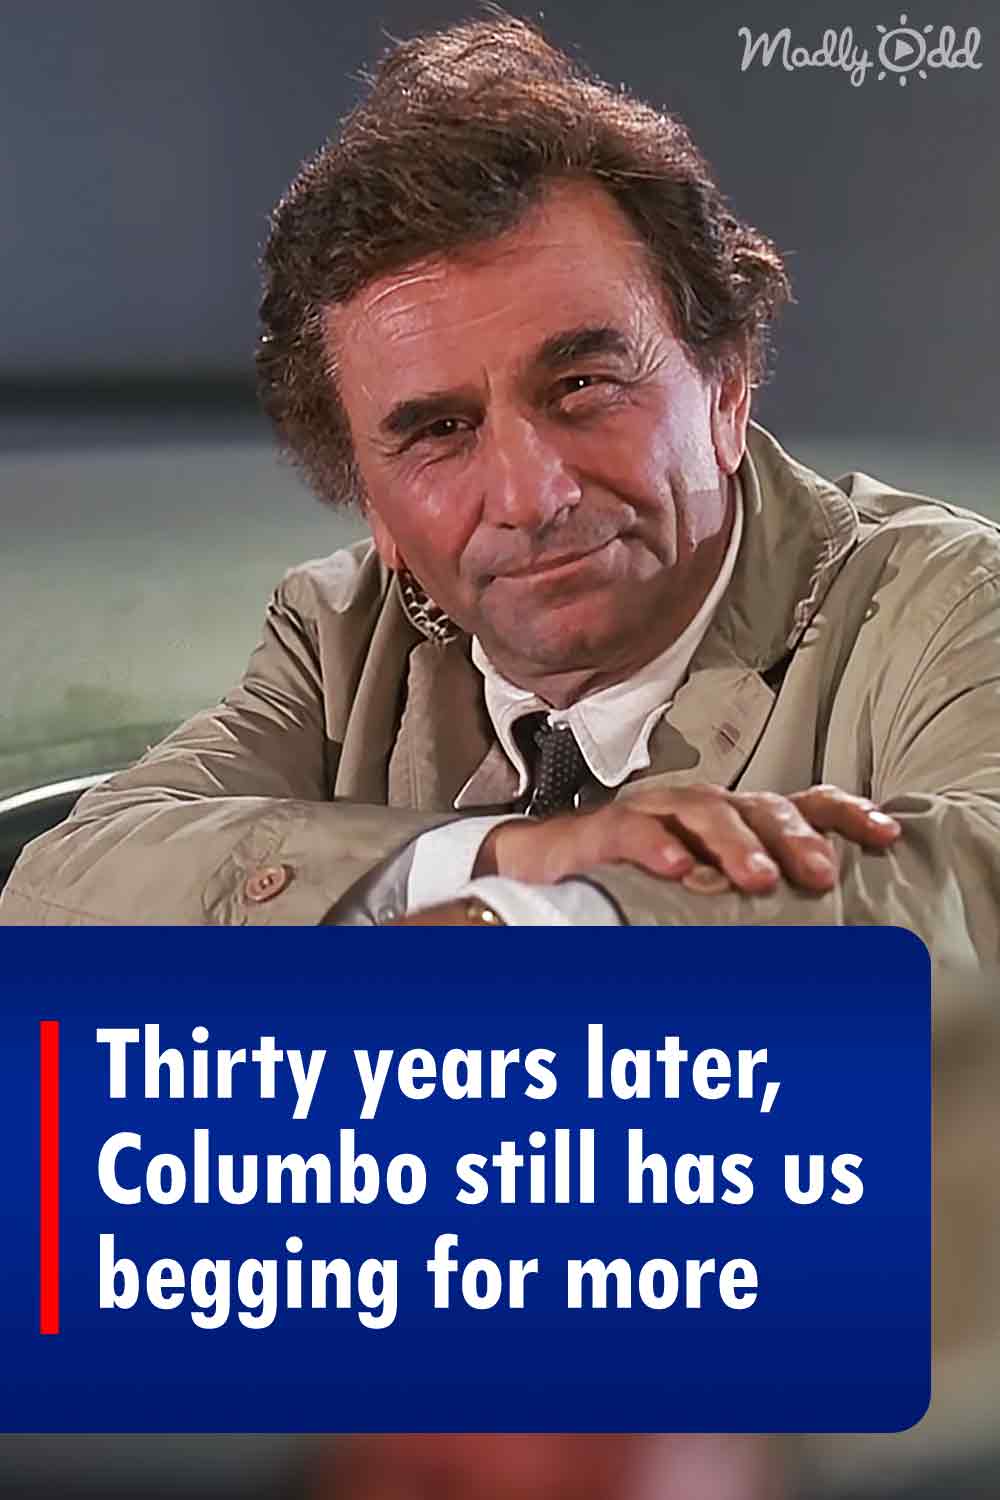 Thirty years later, Columbo still has us begging for more